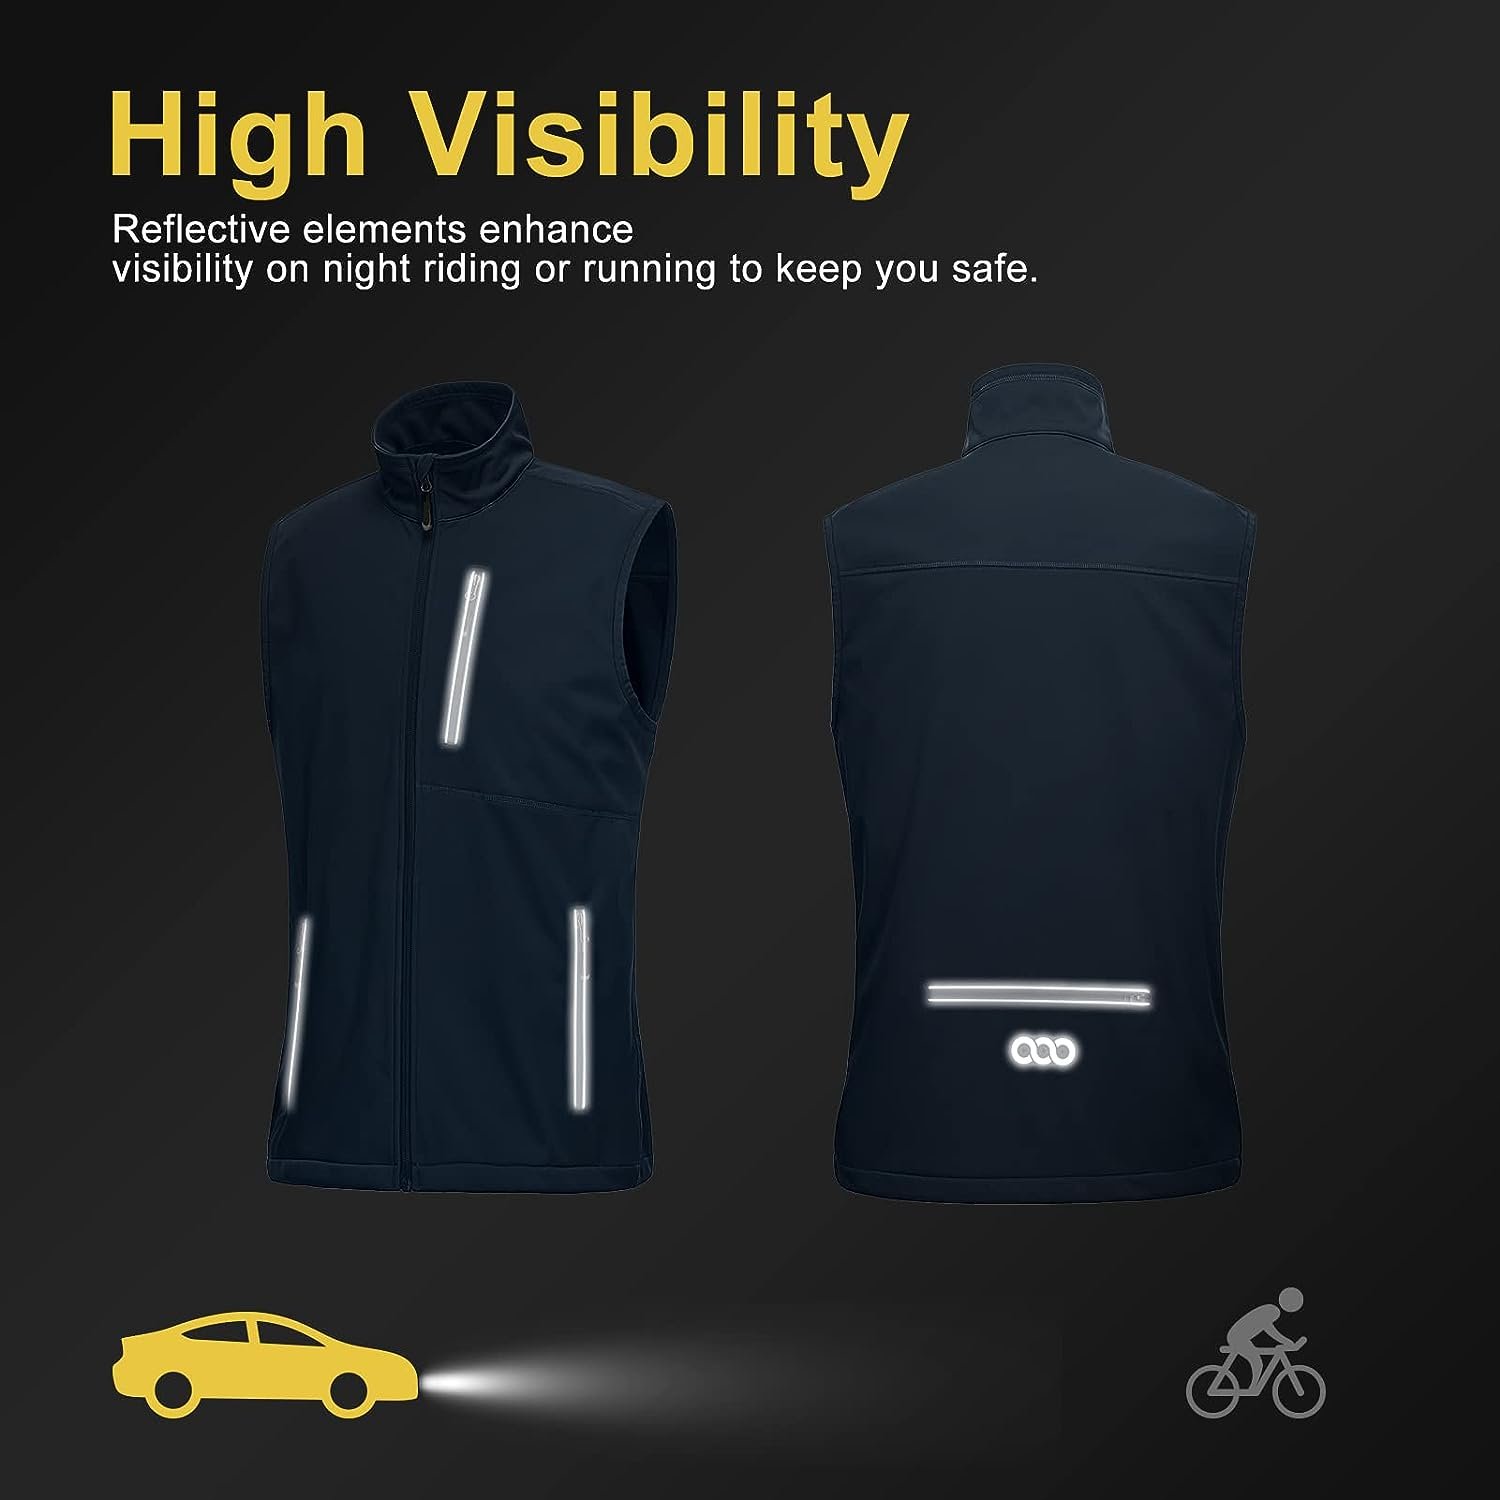 33,000ft Mens Windproof Lightweight Golf Vest Outerwear with Pockets, Softshell Sleeveless Jacket for Running Hiking Sports